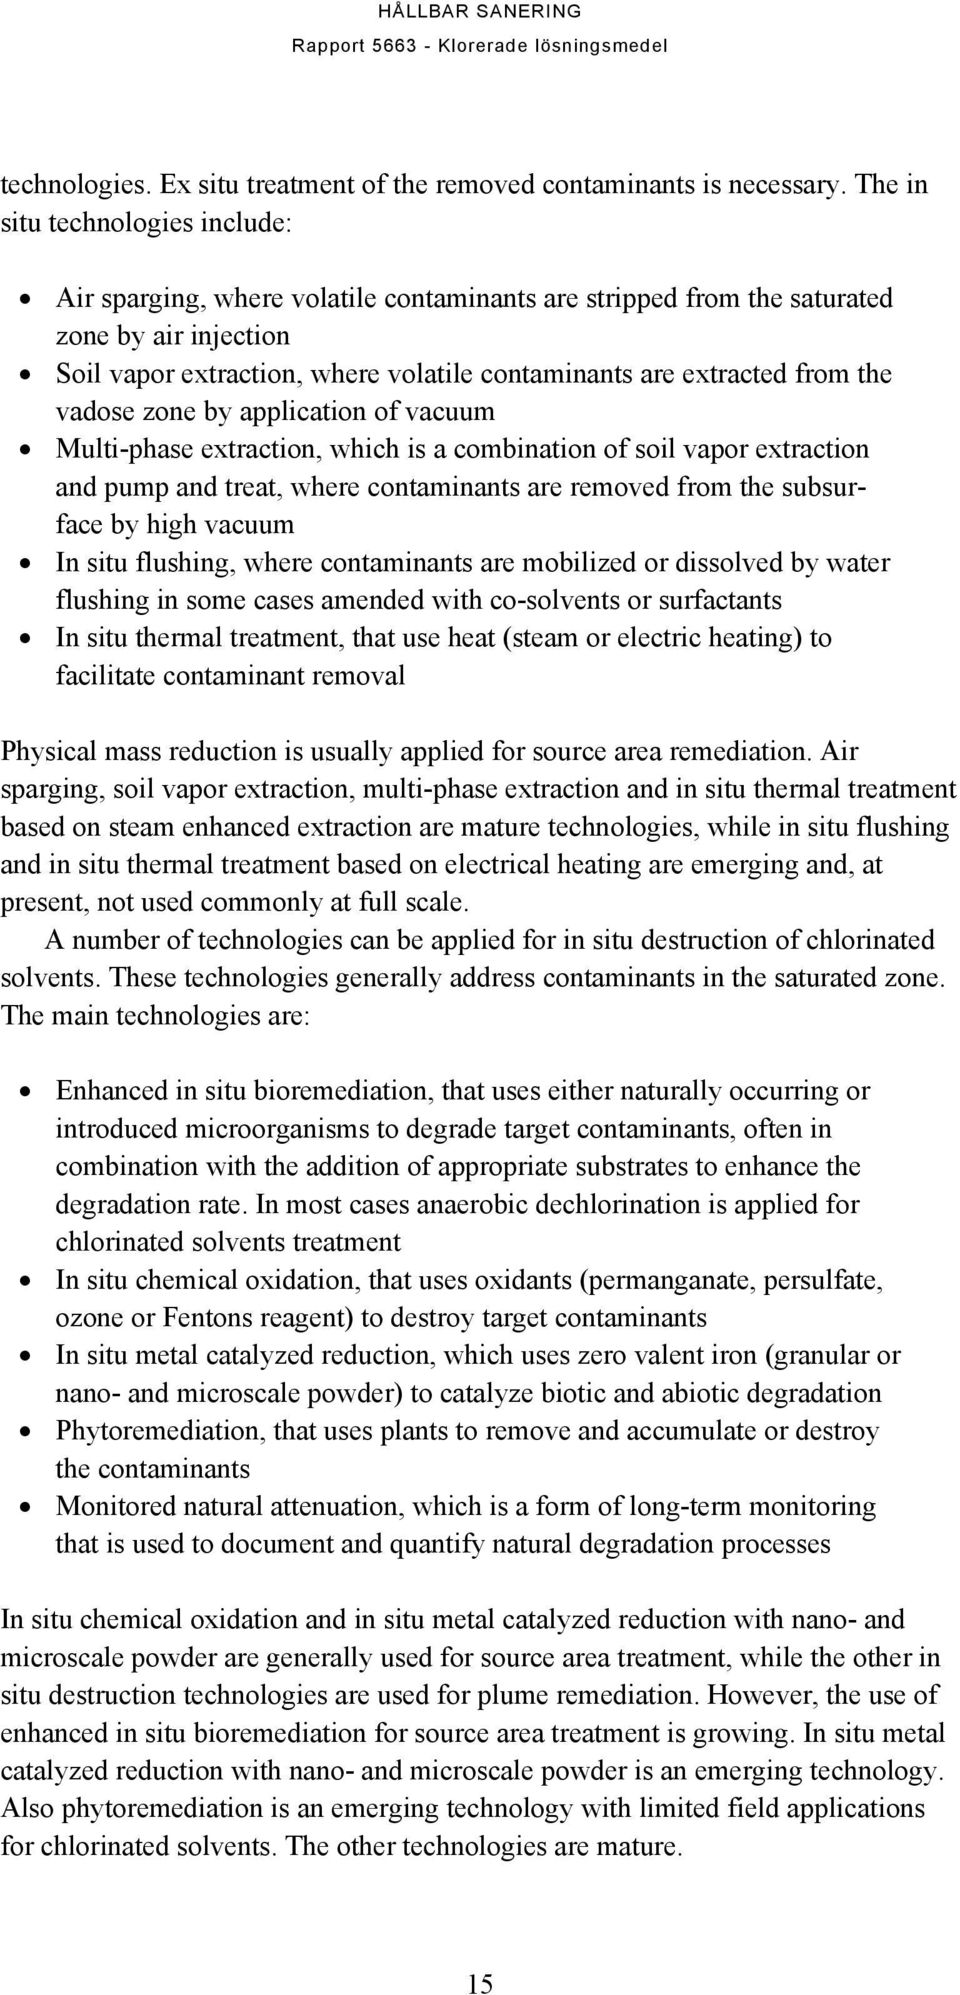 the vadose zone by application of vacuum Multi-phase extraction, which is a combination of soil vapor extraction and pump and treat, where contaminants are removed from the subsurface by high vacuum